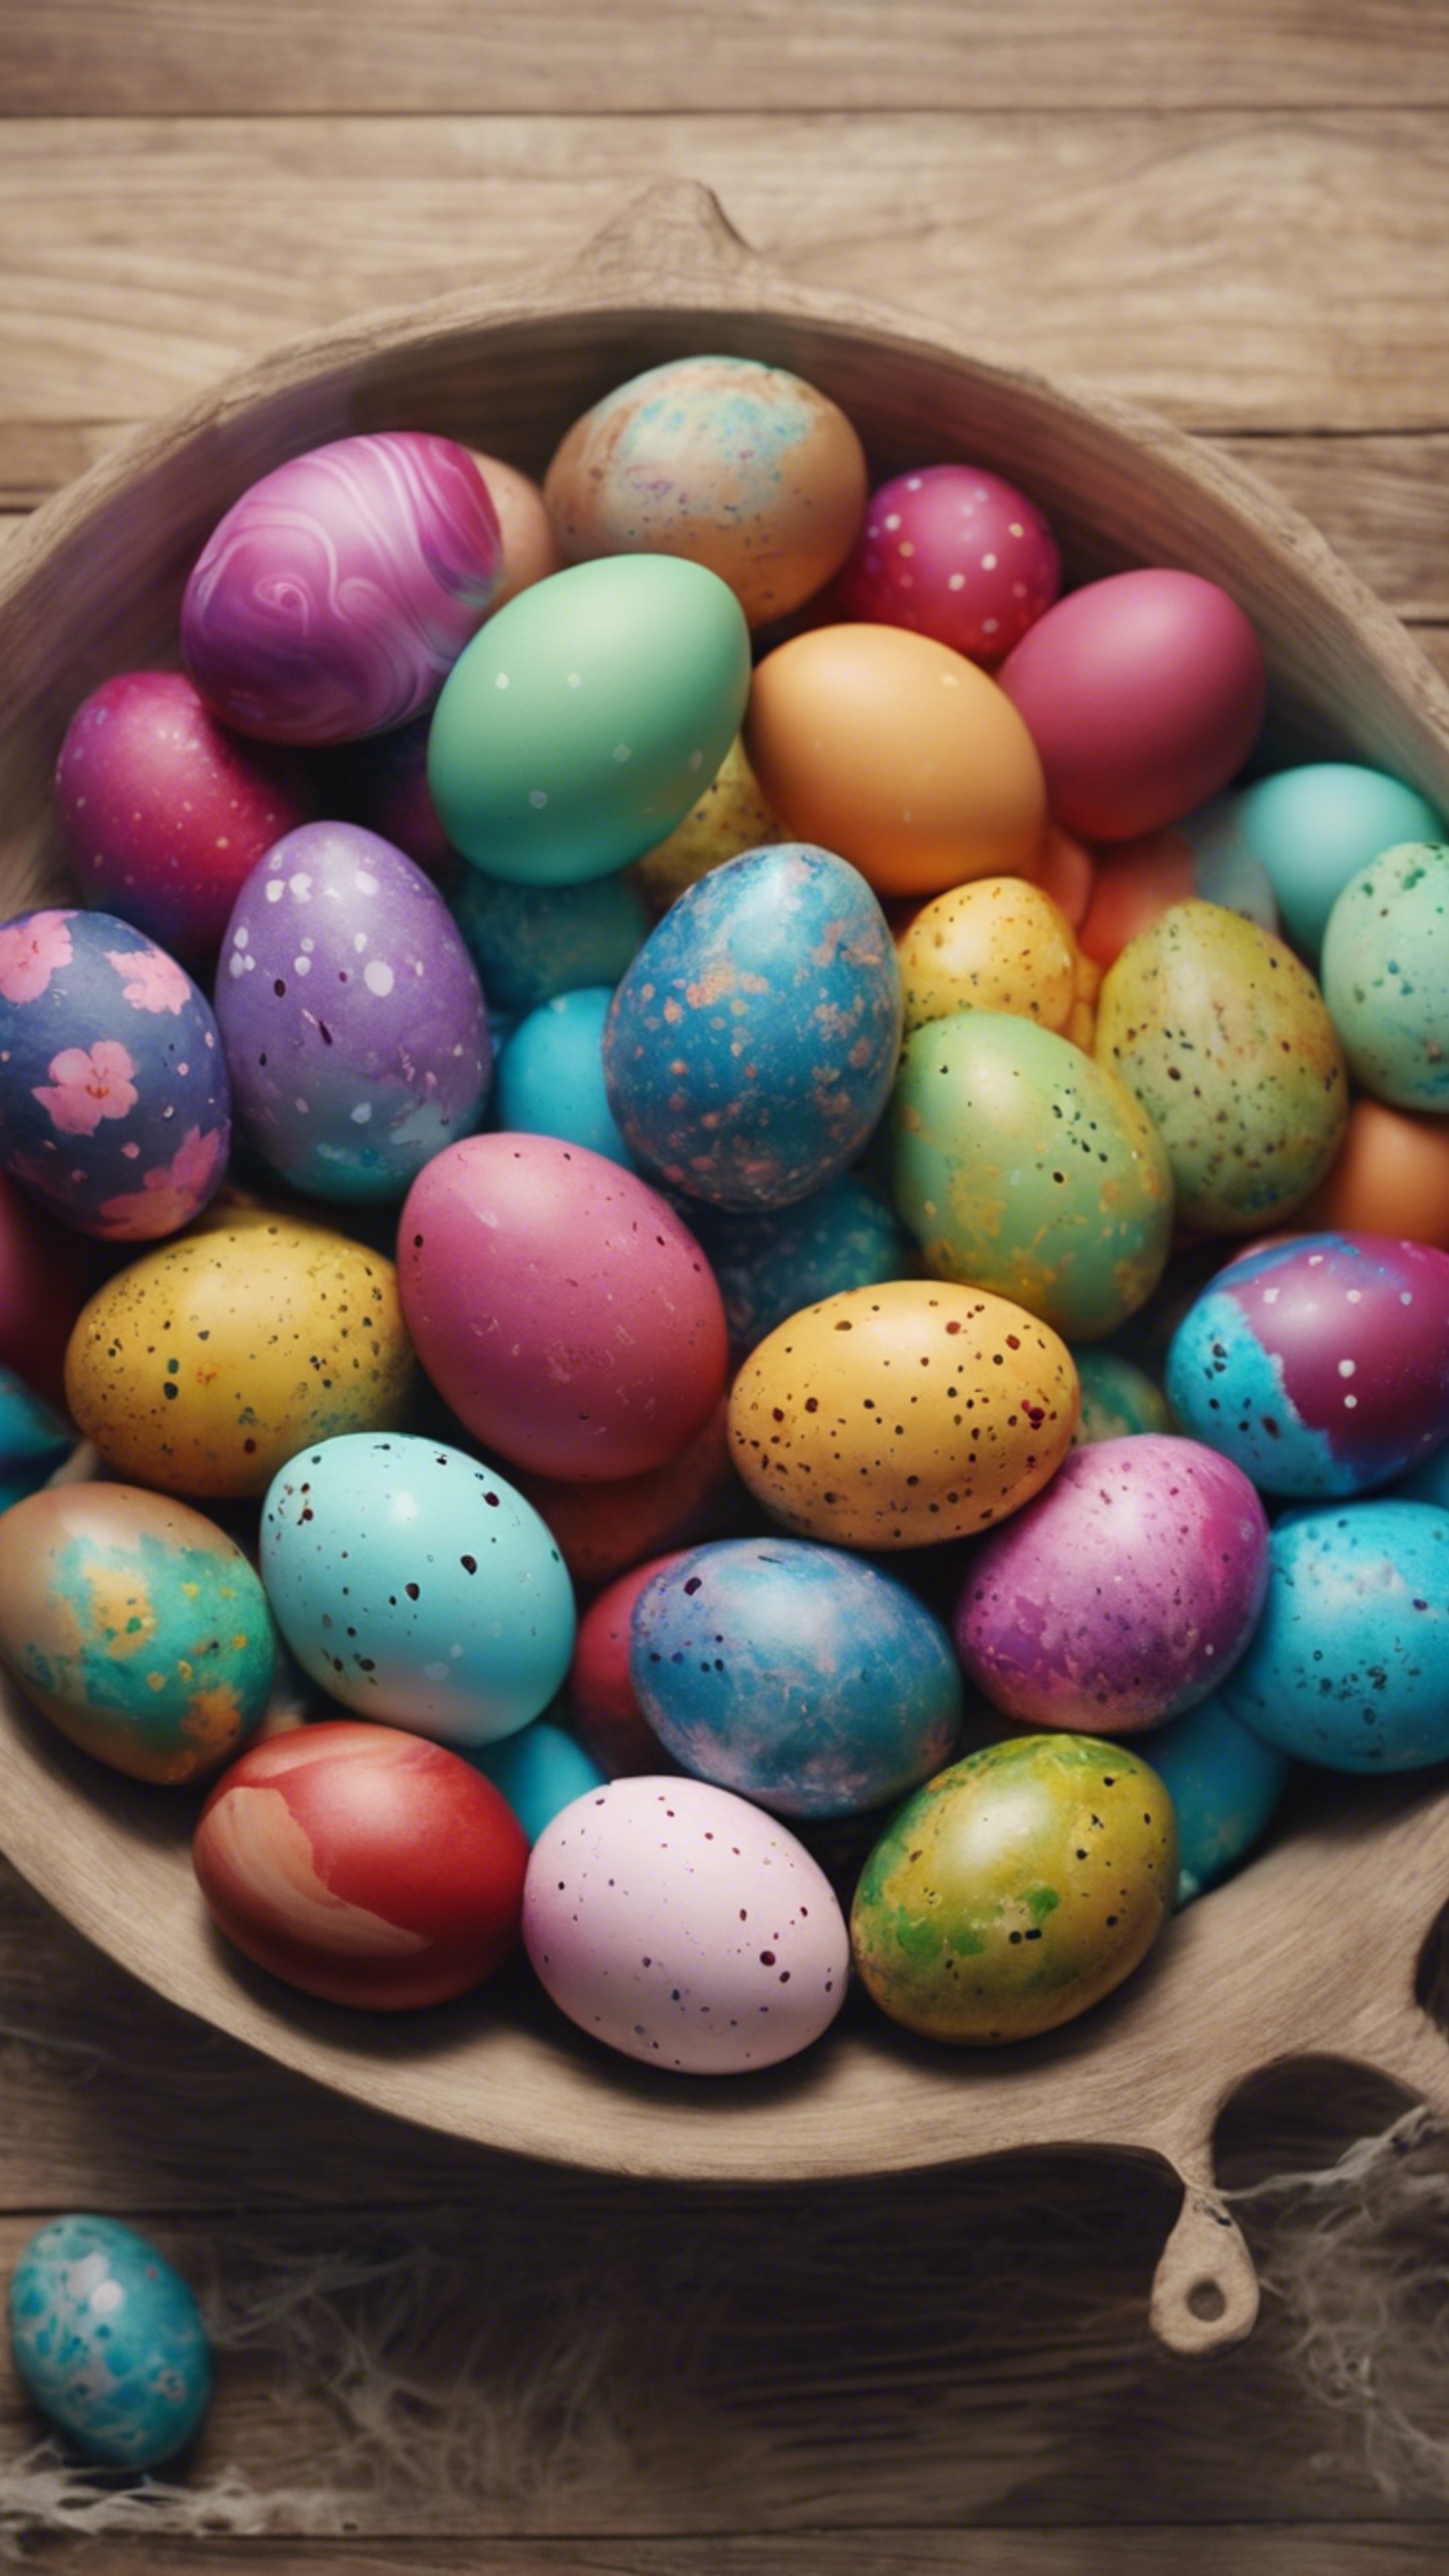 Steaming pot of colorful dyed Easter eggs with speckled designs, on a wooden table.壁紙[84cae079e5a44b089b64]